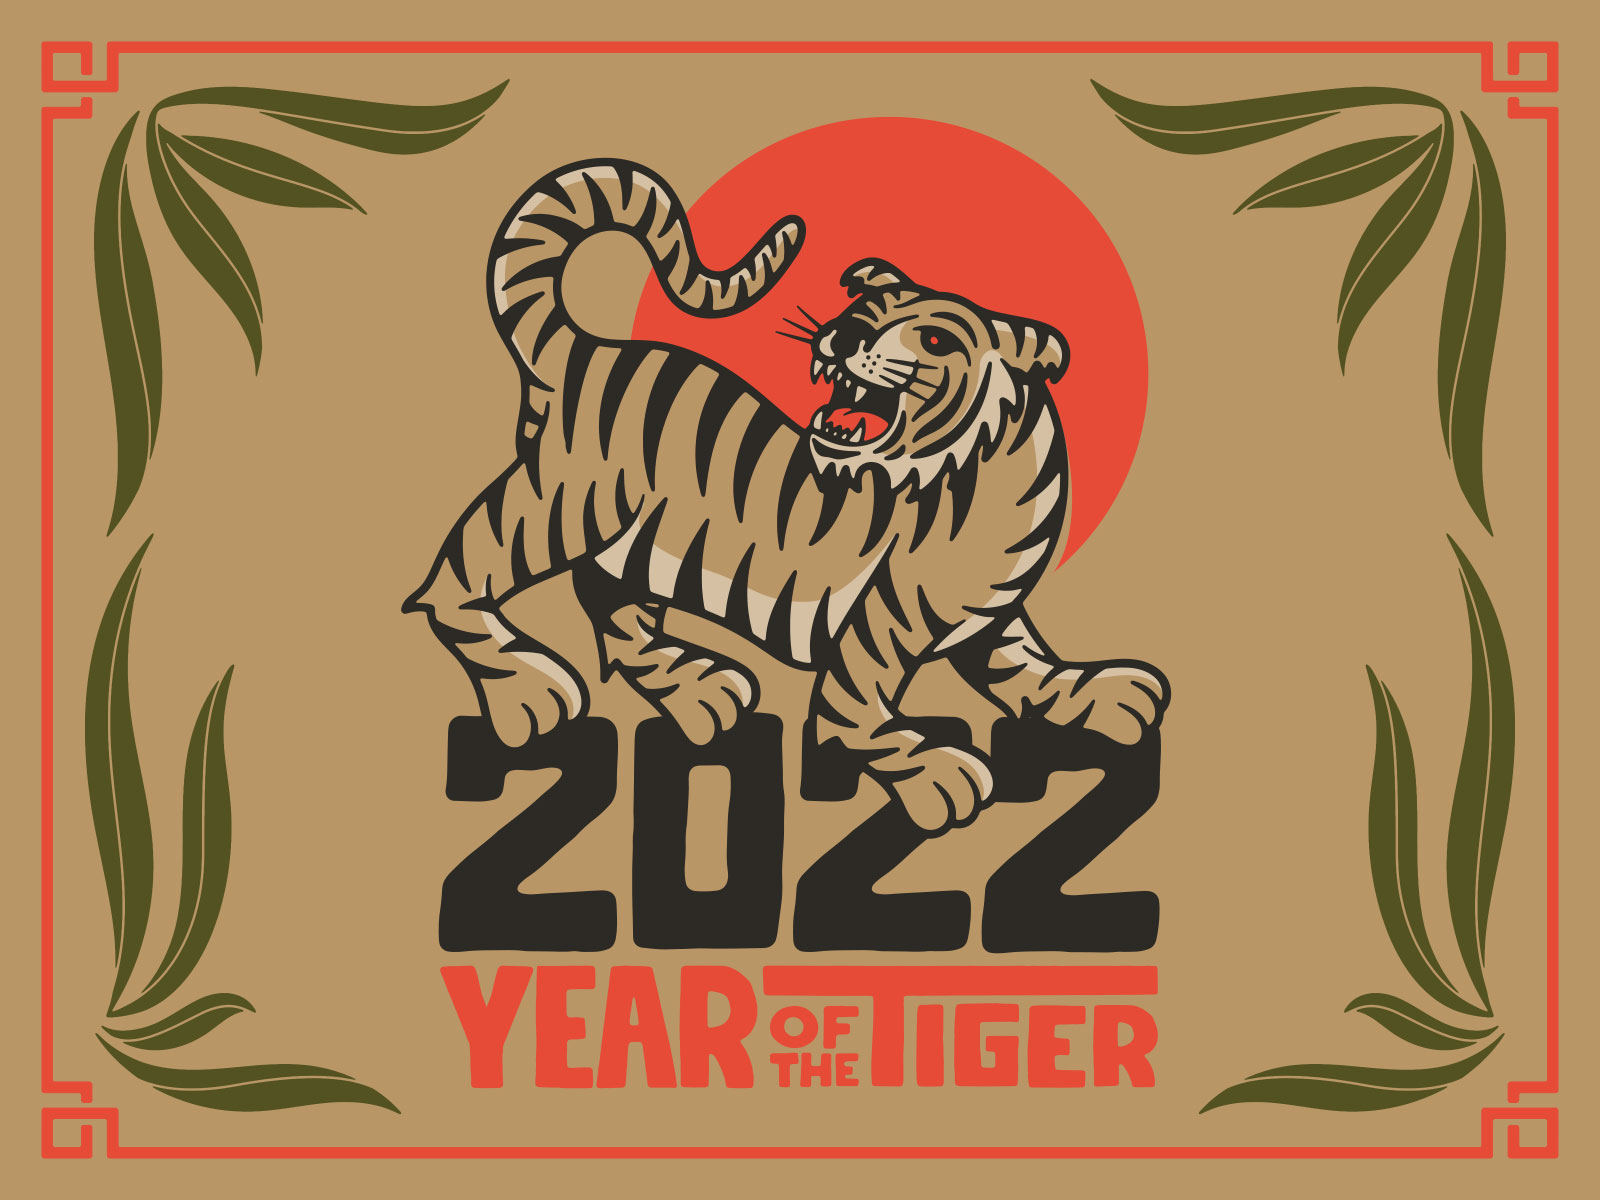 Year Of The Tiger! 2022 aapi badgedesign cat chinese new year graphic design gung hai fat choy illustration illustrator lunar new year tiger typography vector year of the tiger